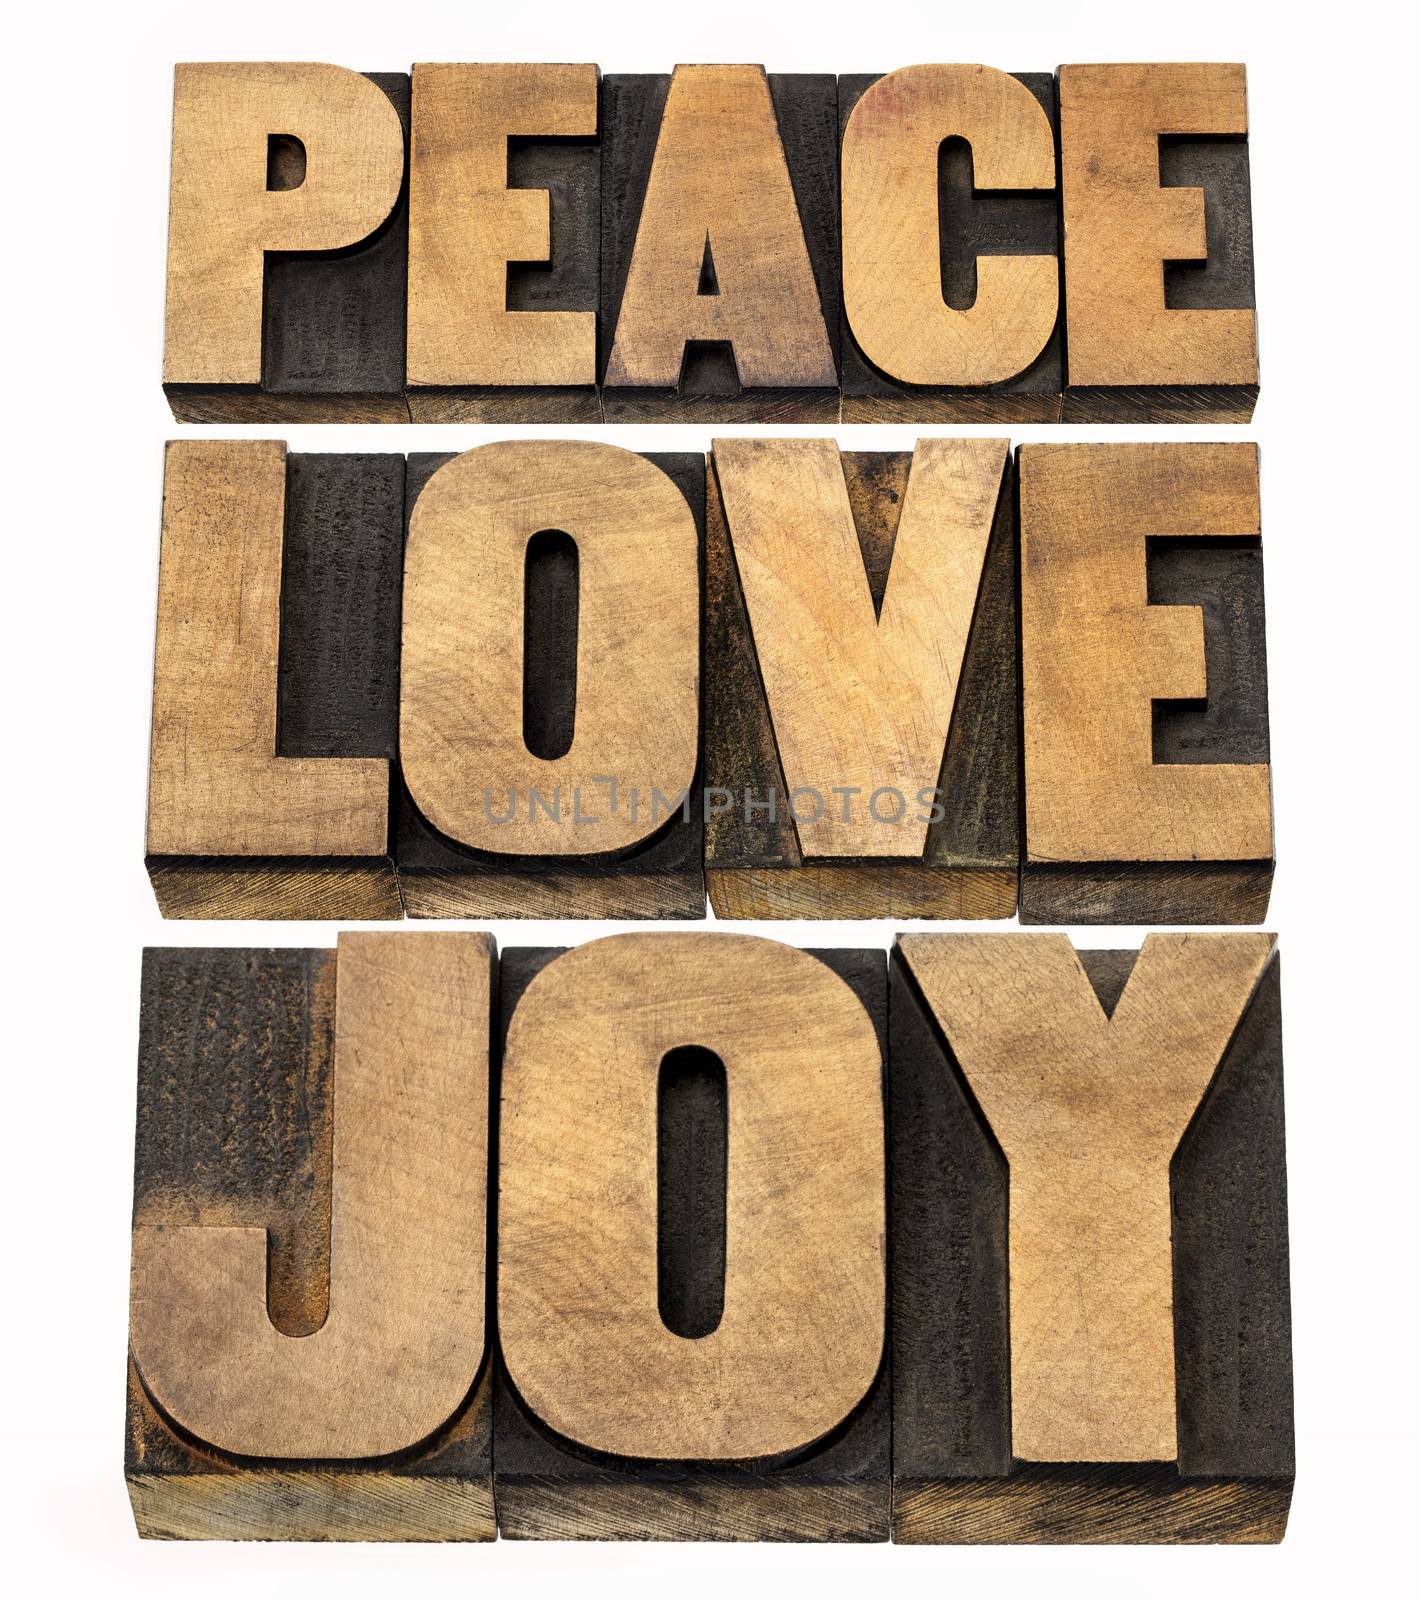 peace, love and joy in wood type by PixelsAway